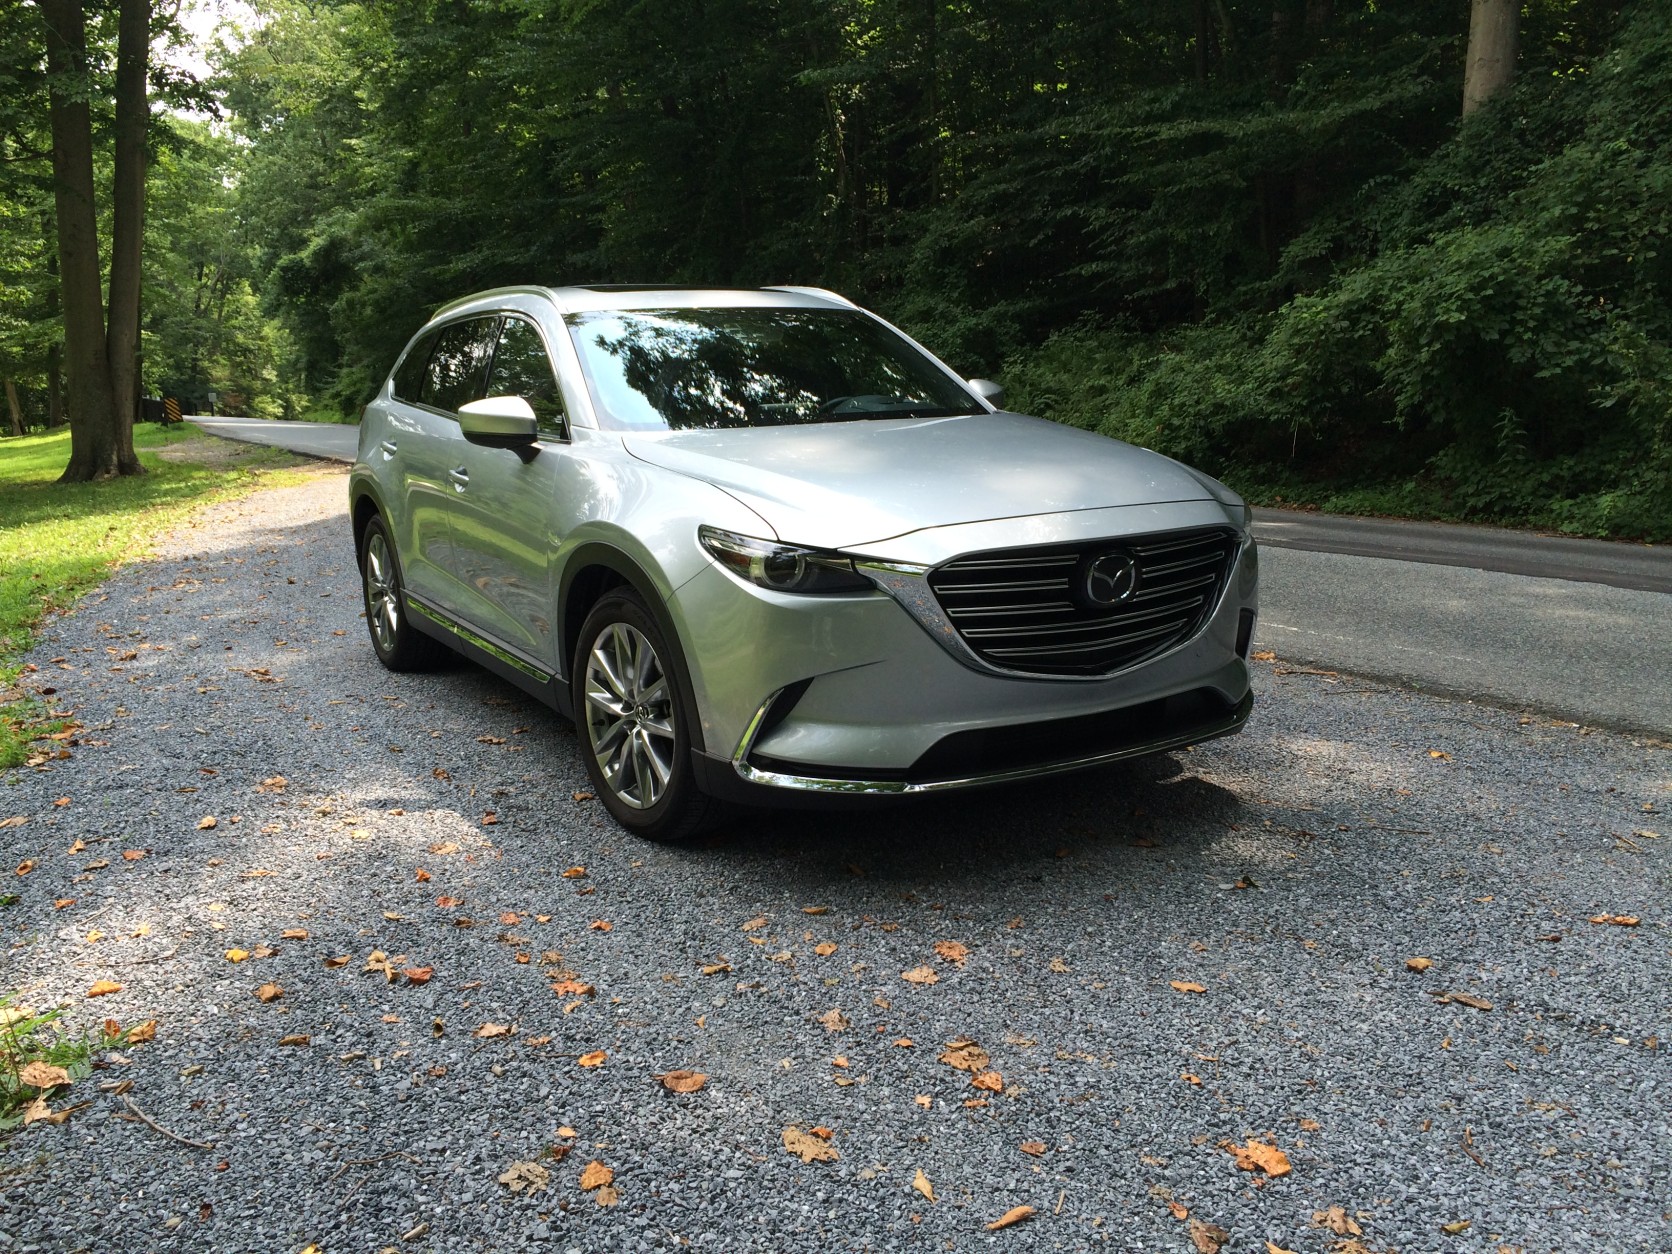 The outside of the Mazda CX-9 is impressive and different, and so is what’s under the hood. (WTOP/Mike Parris)